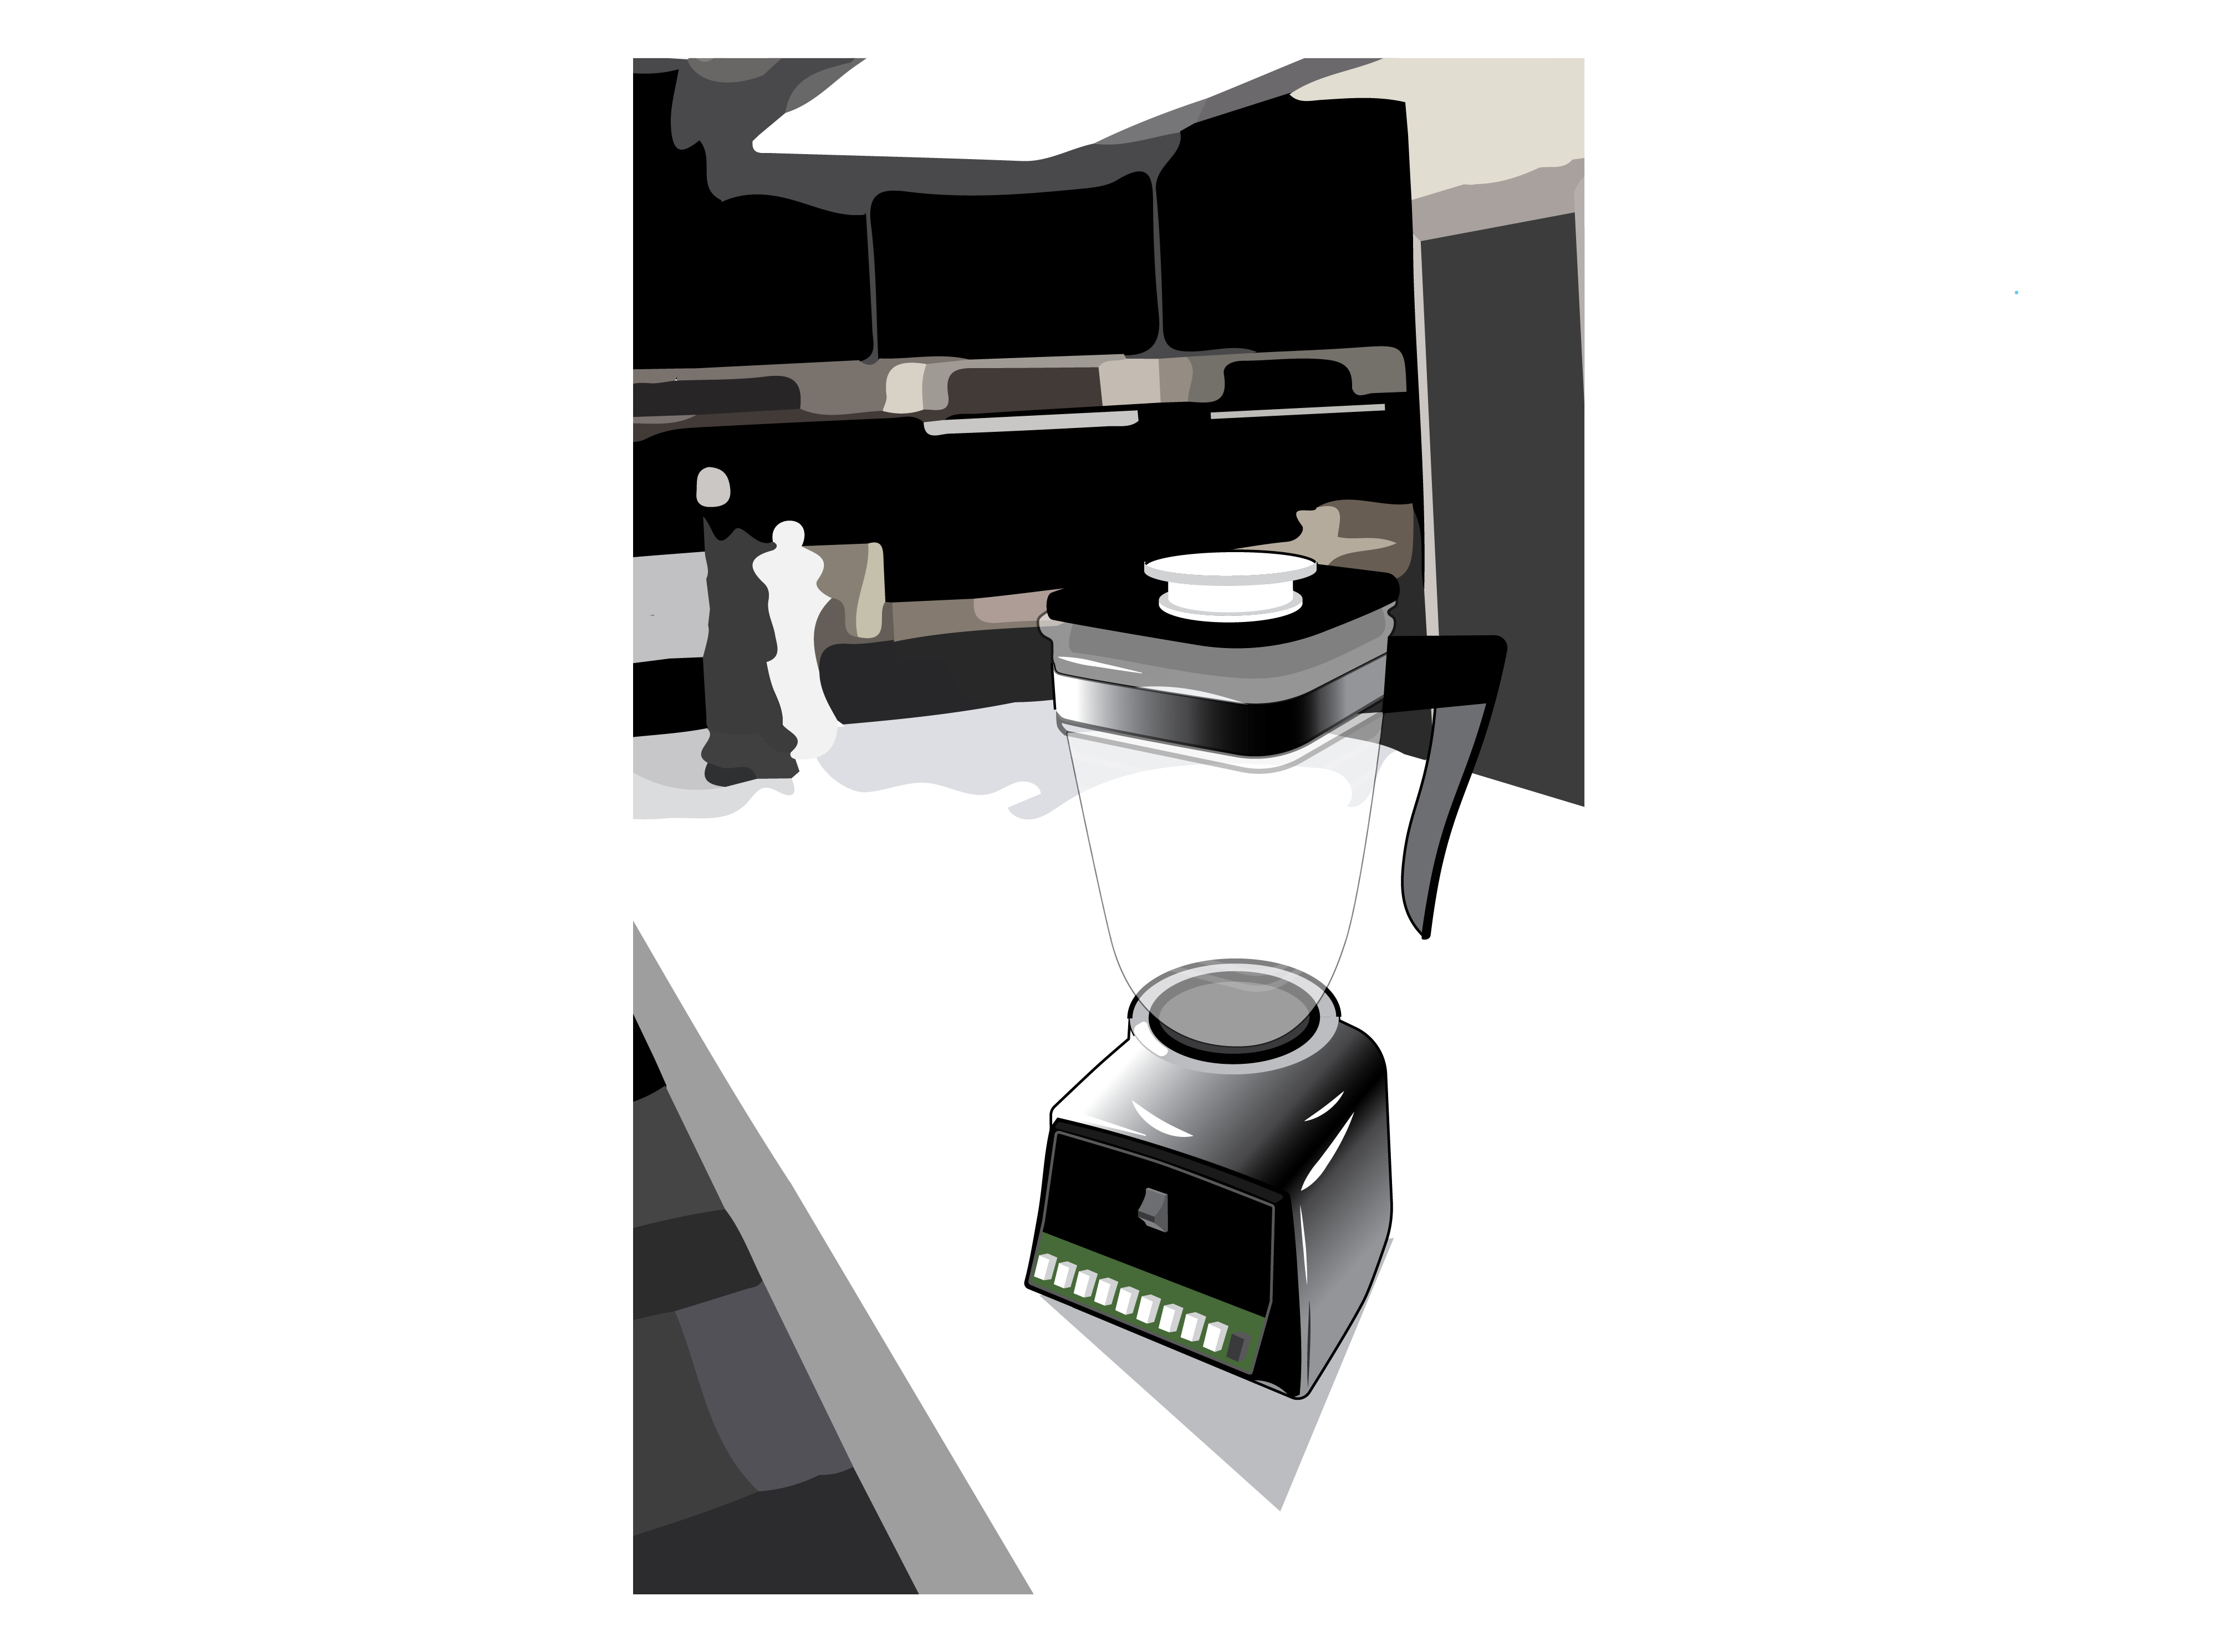 A blender sits on a kitchen counter. The blender is steel and black with a transparent container sitting on its base. The stand has a row of white buttons along its bottom edge. It sits on a white counter in a black and white kitchen.